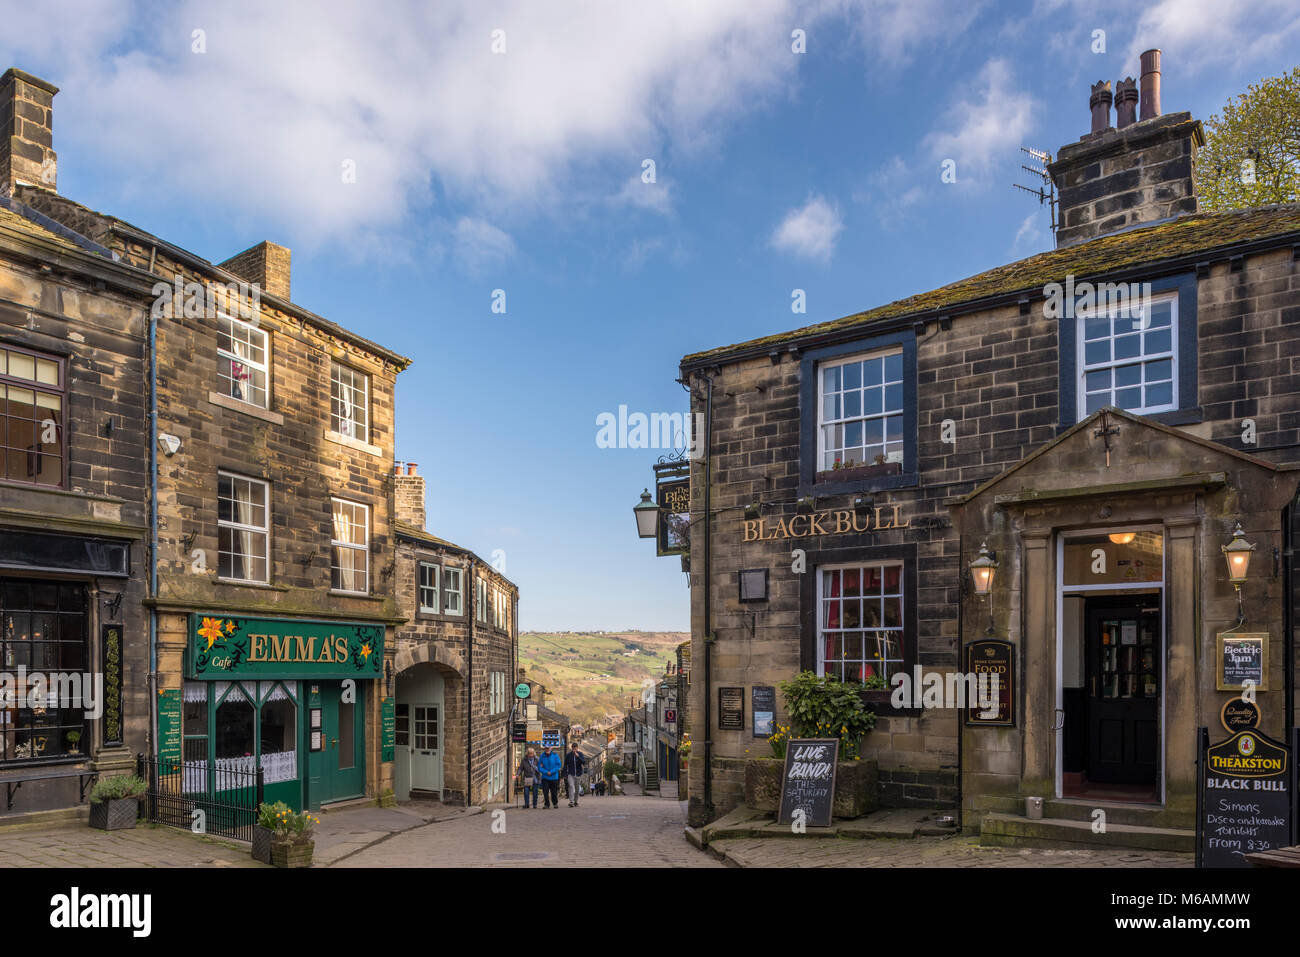 Haworth village where Bronte sisters lived, view down steep, quaint, narrow Main Street, Black Bull pub in foreground - West Yorkshire, England, UK. Stock Photo